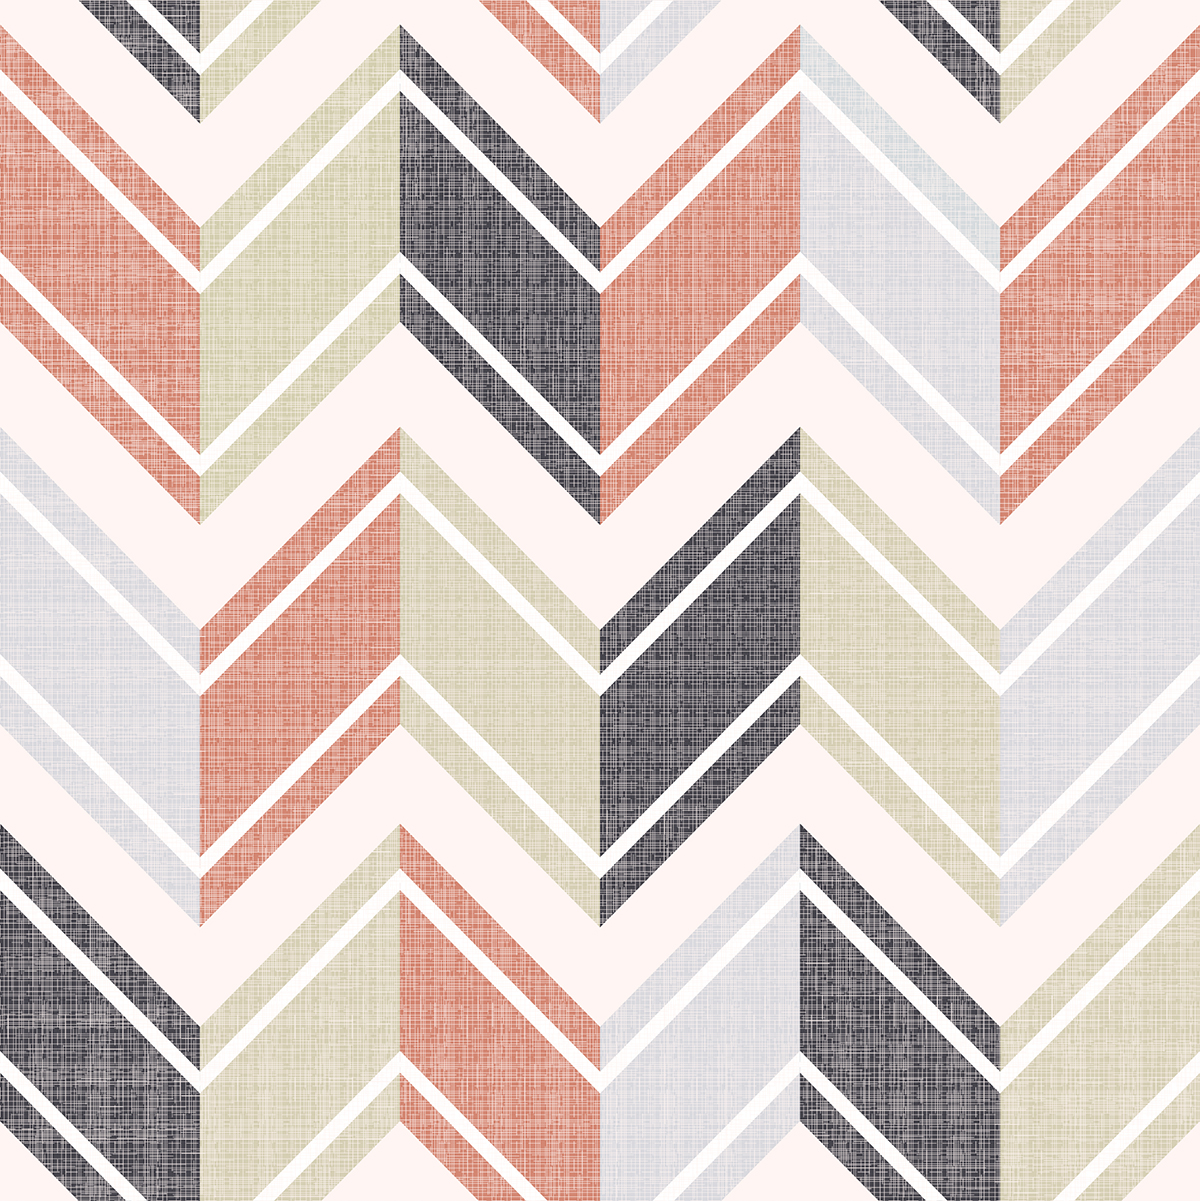 A fabric with zigzag lines